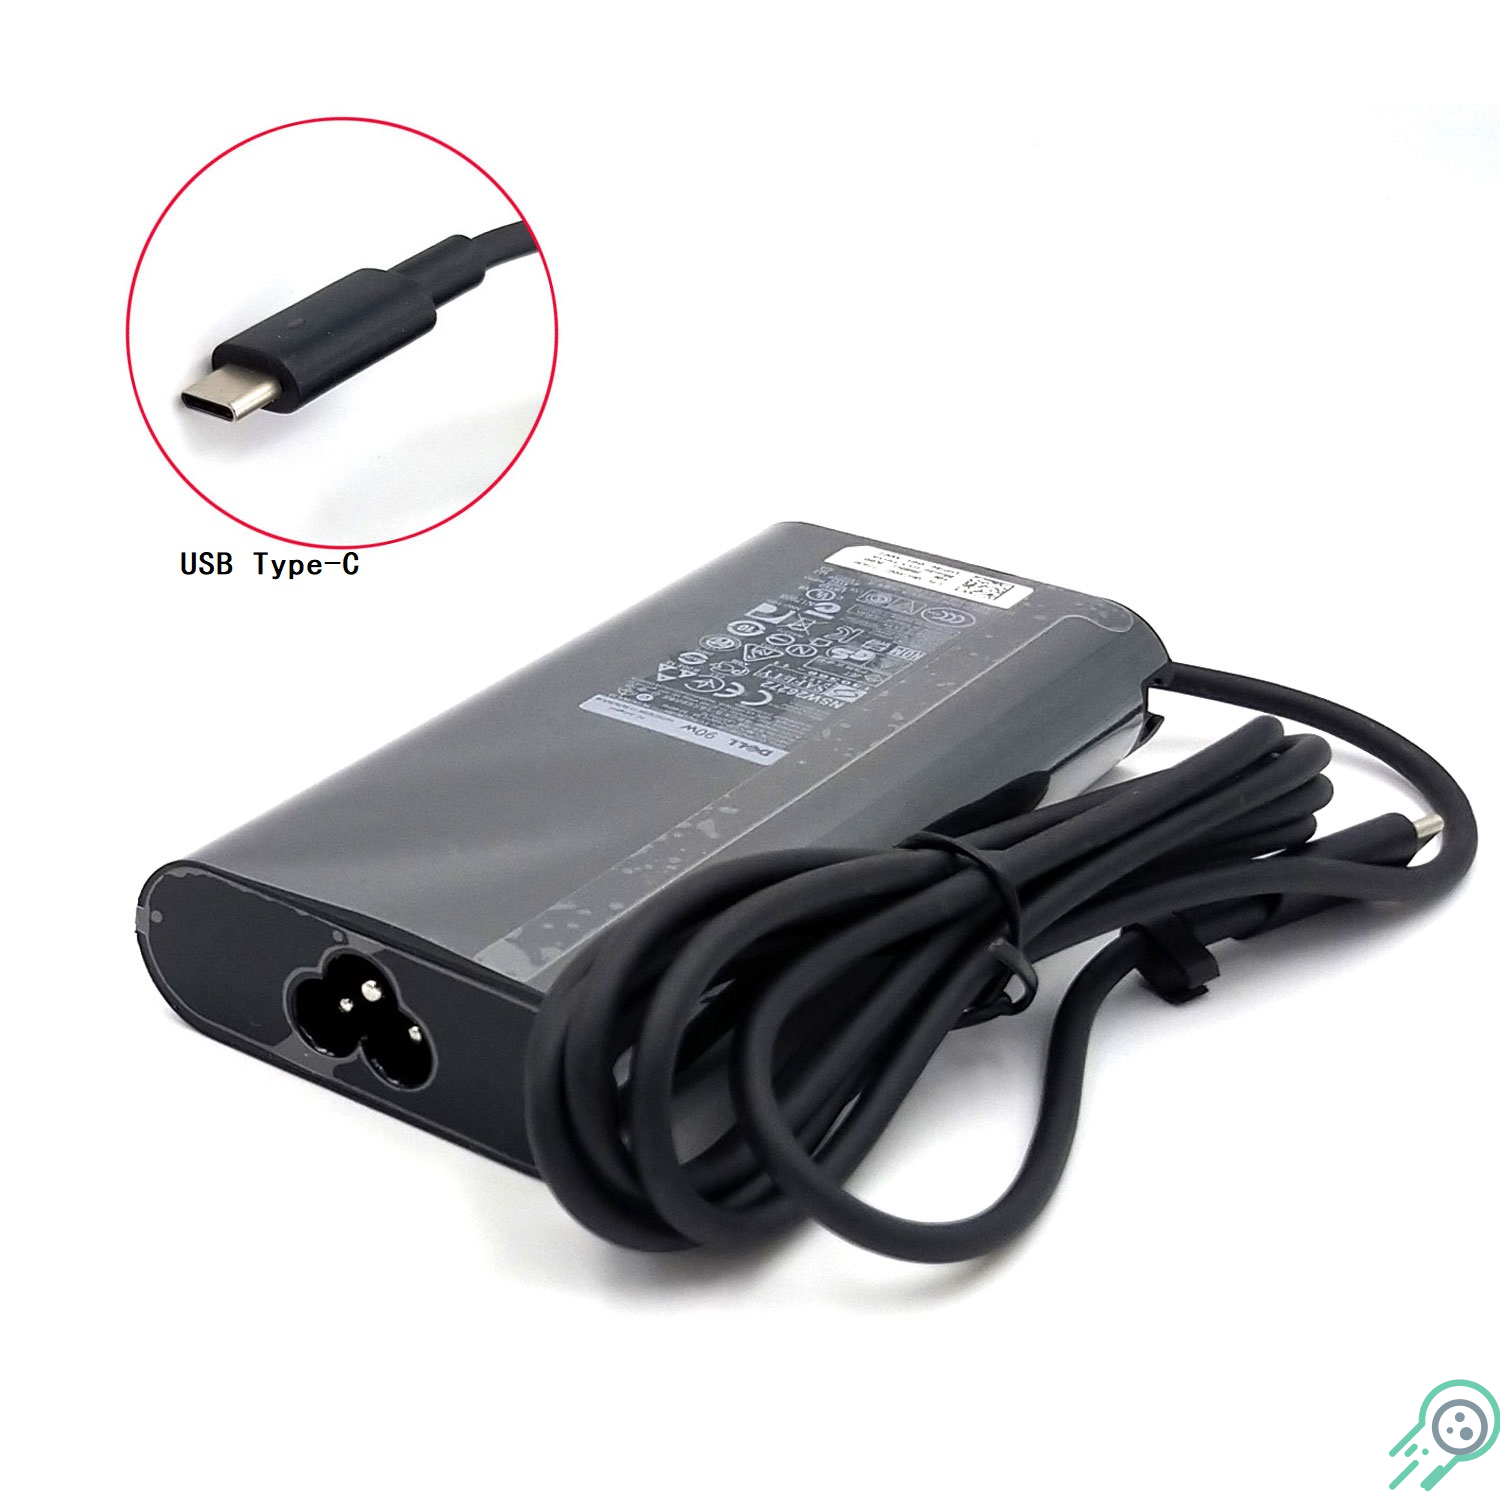   Dell Latitude 3500-WJY73 AC Adapter Charger